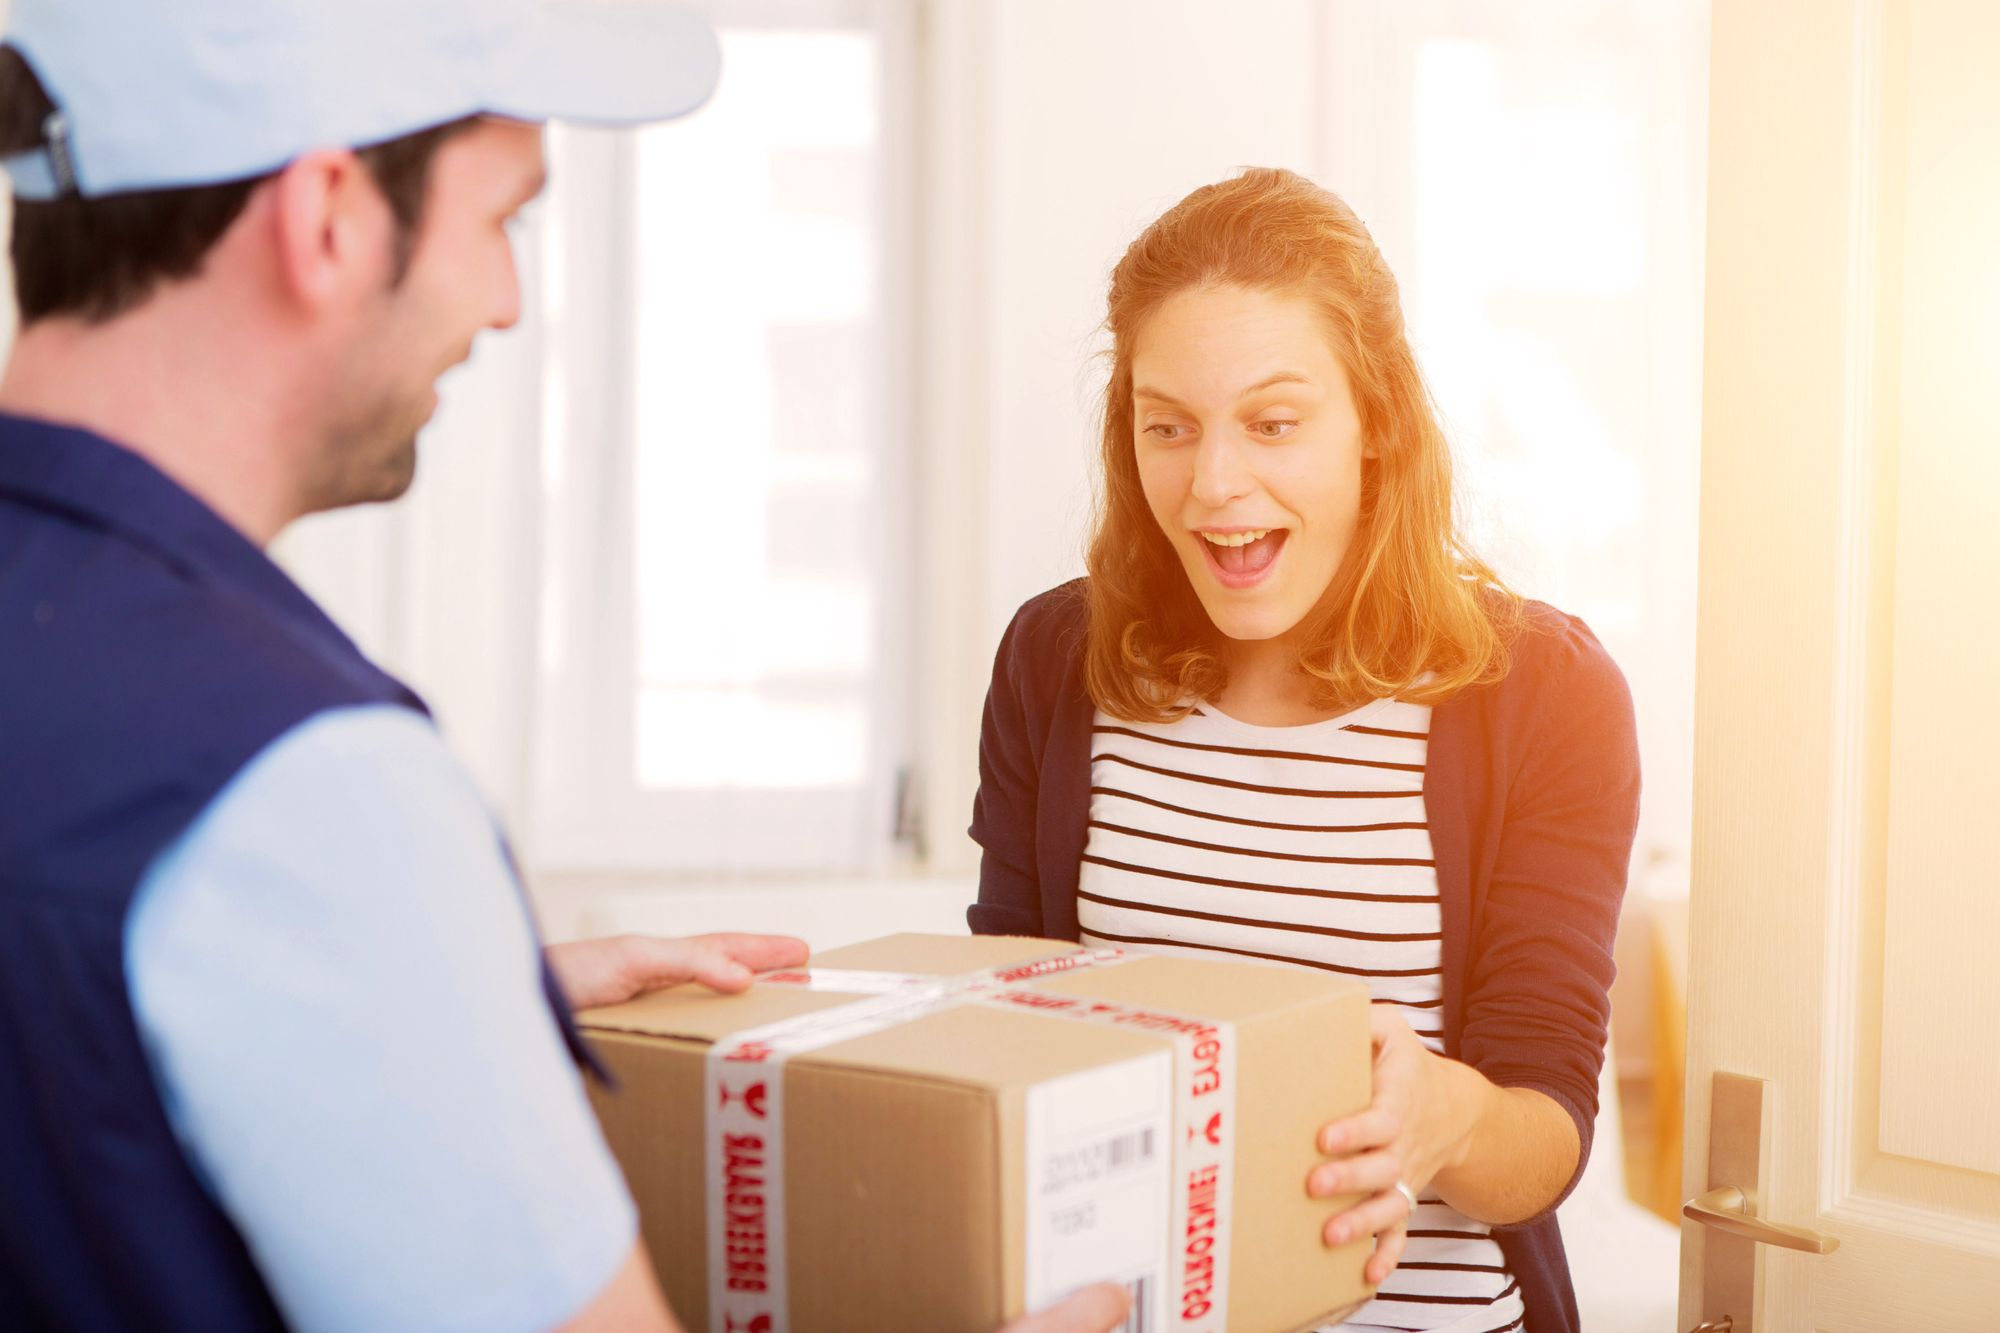 A smiling woman accepting a parcel from a delivery driver at the front door